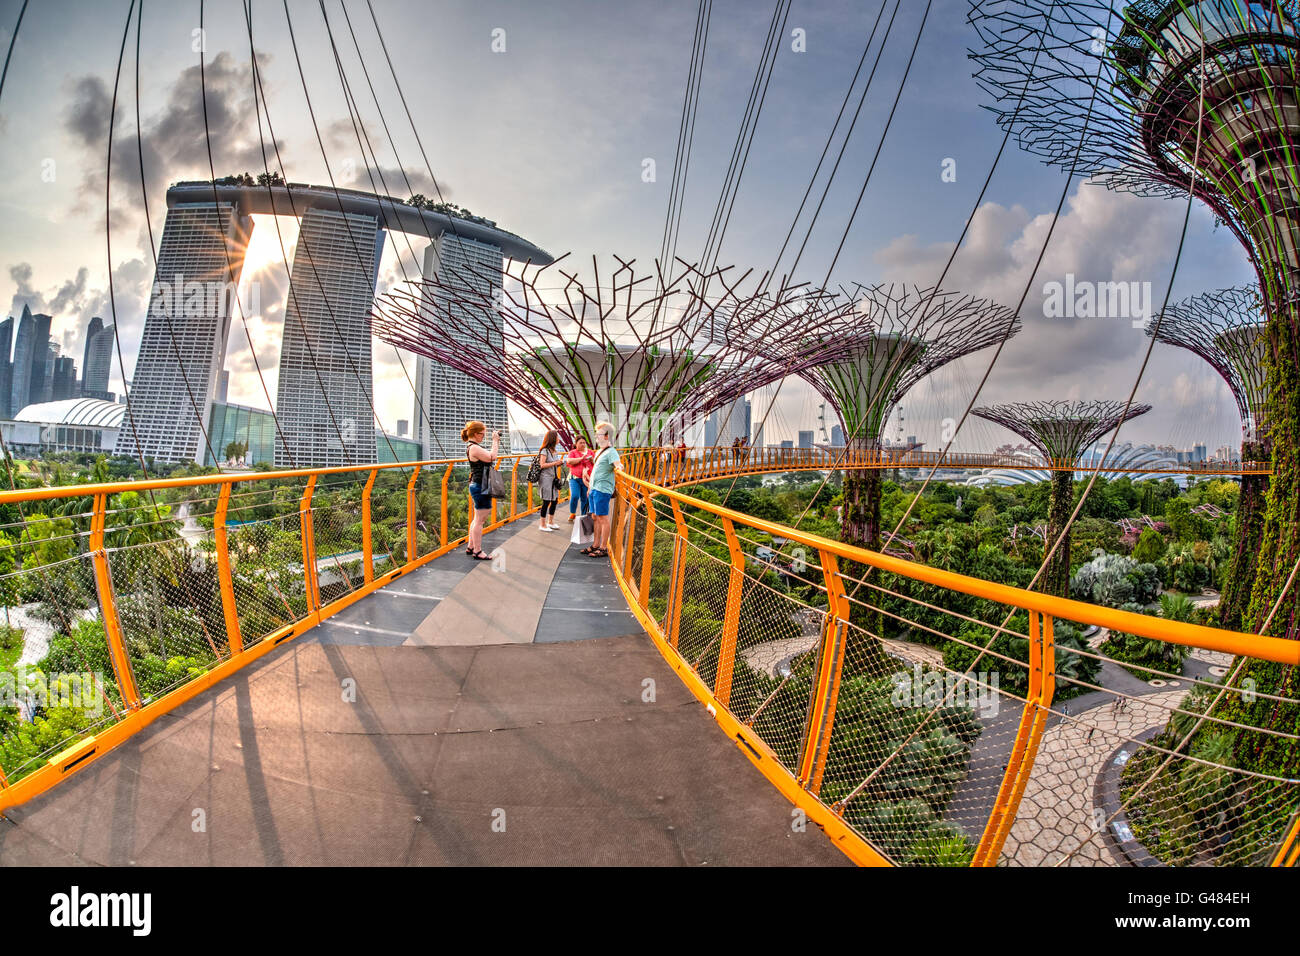 Singapore, Singapore - July 13, 2015: Visitors enjoying the sunset view atop the Supertree Grove at Gardens by the Bay. These ma Stock Photo